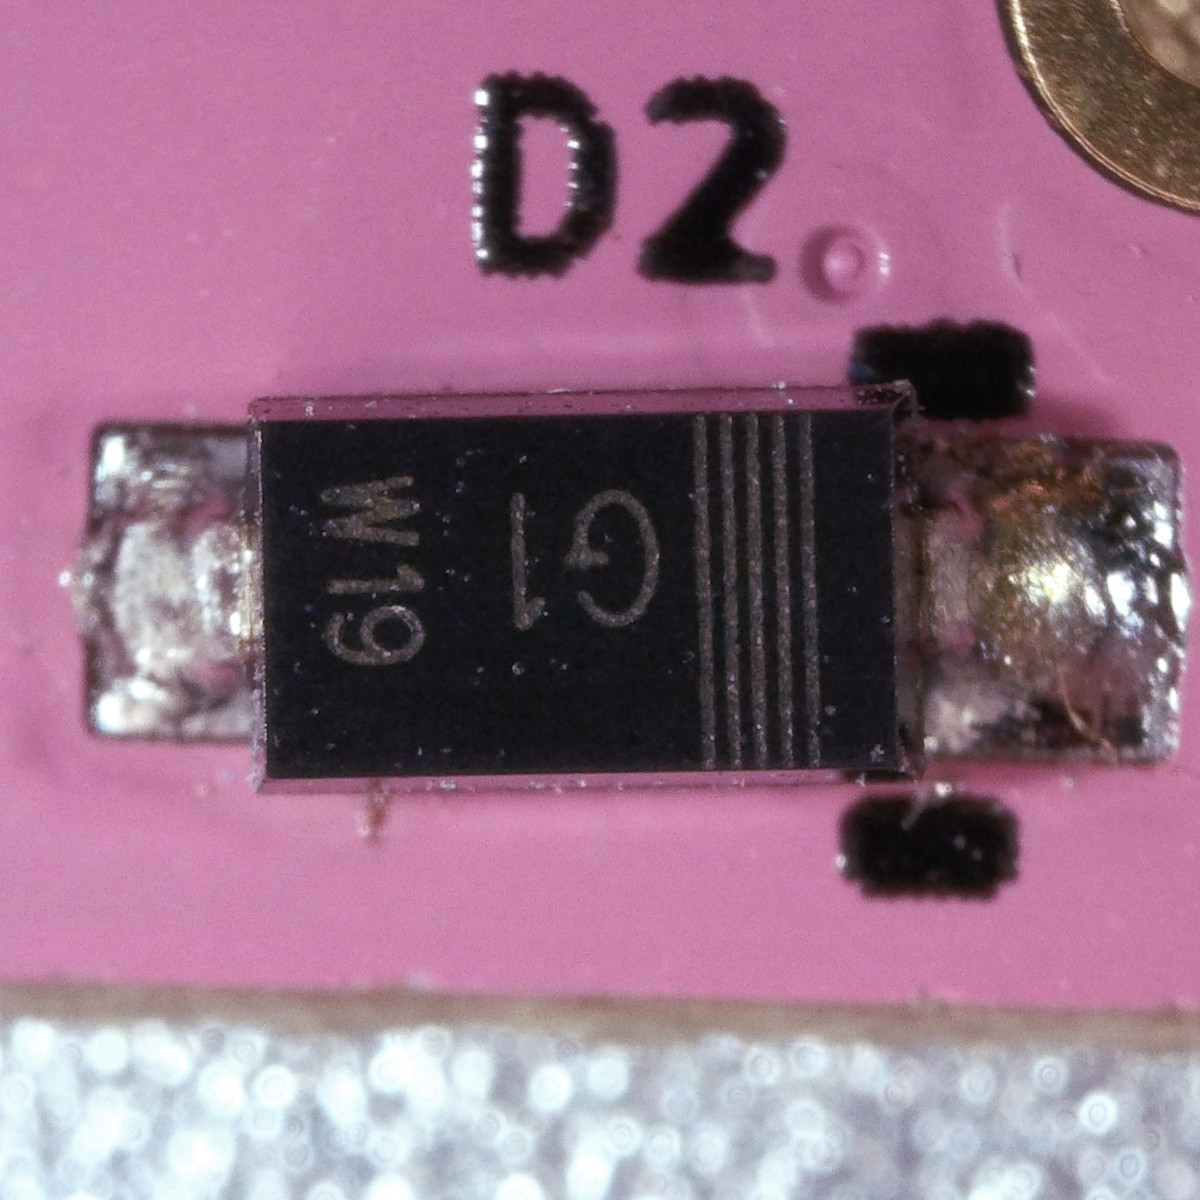 A photo showing the proper alignment of diodes